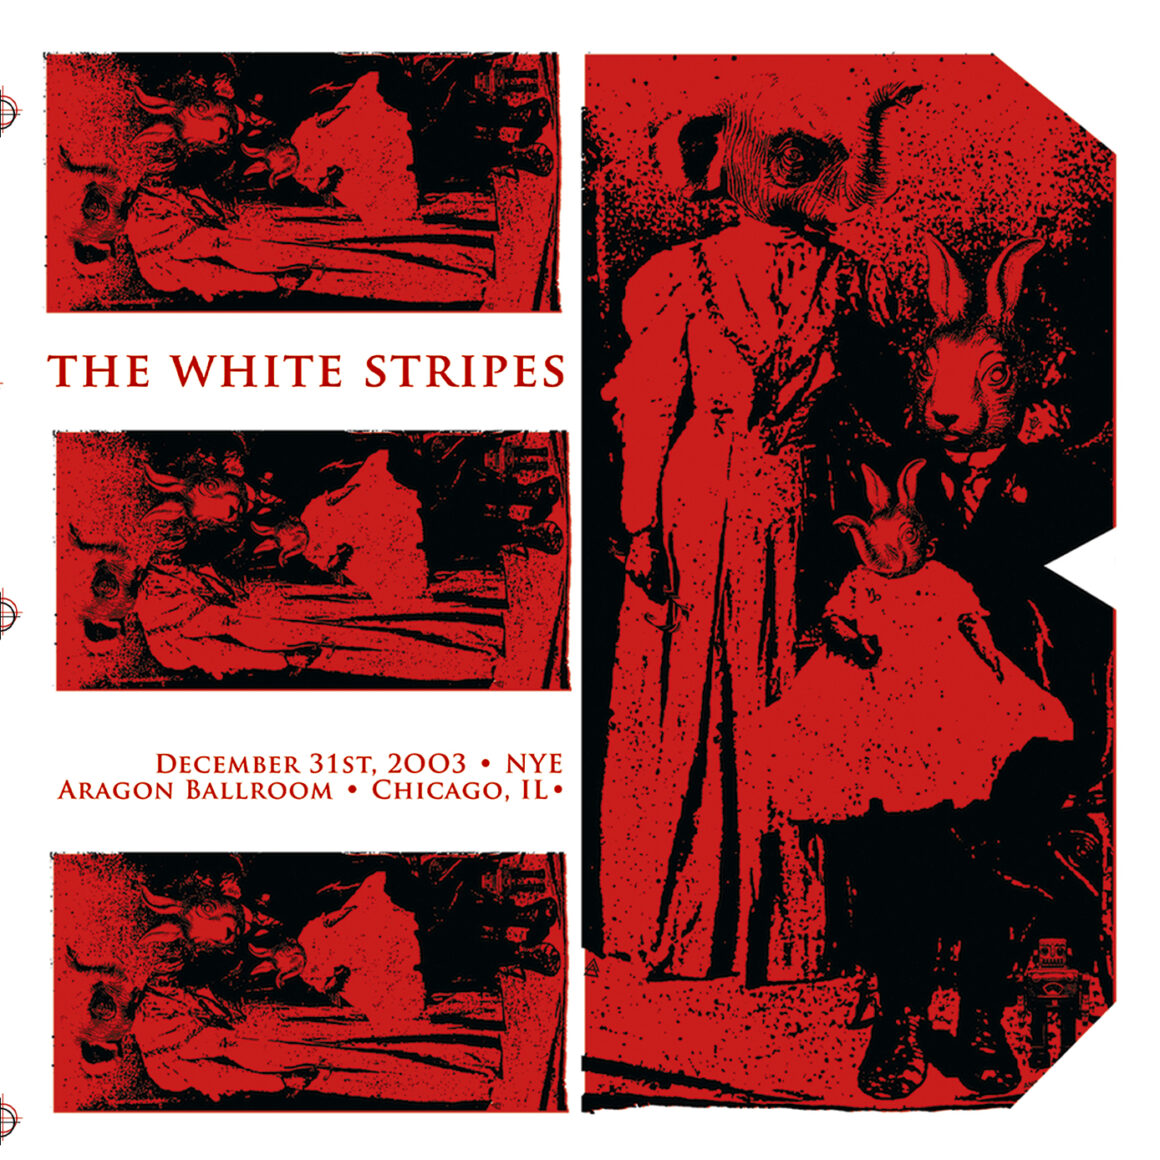 The White Stripes: Chicago, IL, New Years Eve, 2003